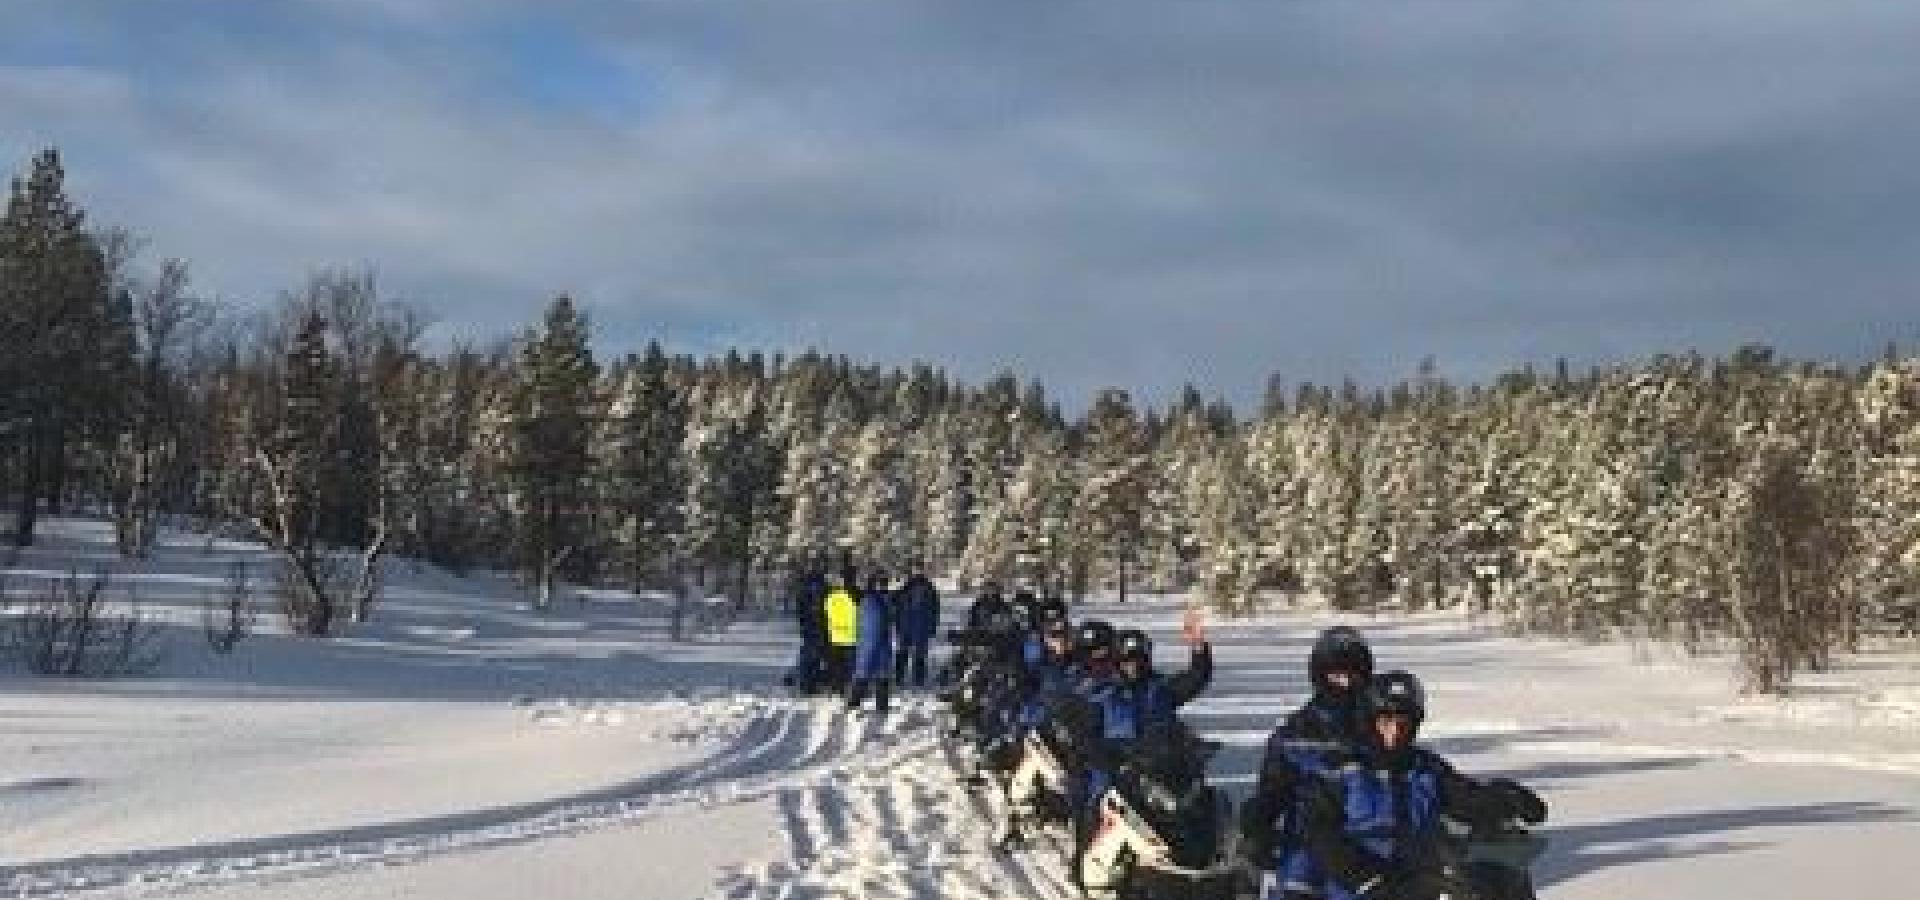 Winter activities in Skibotn - Dog sledding in the morning and snowmobile in the evening